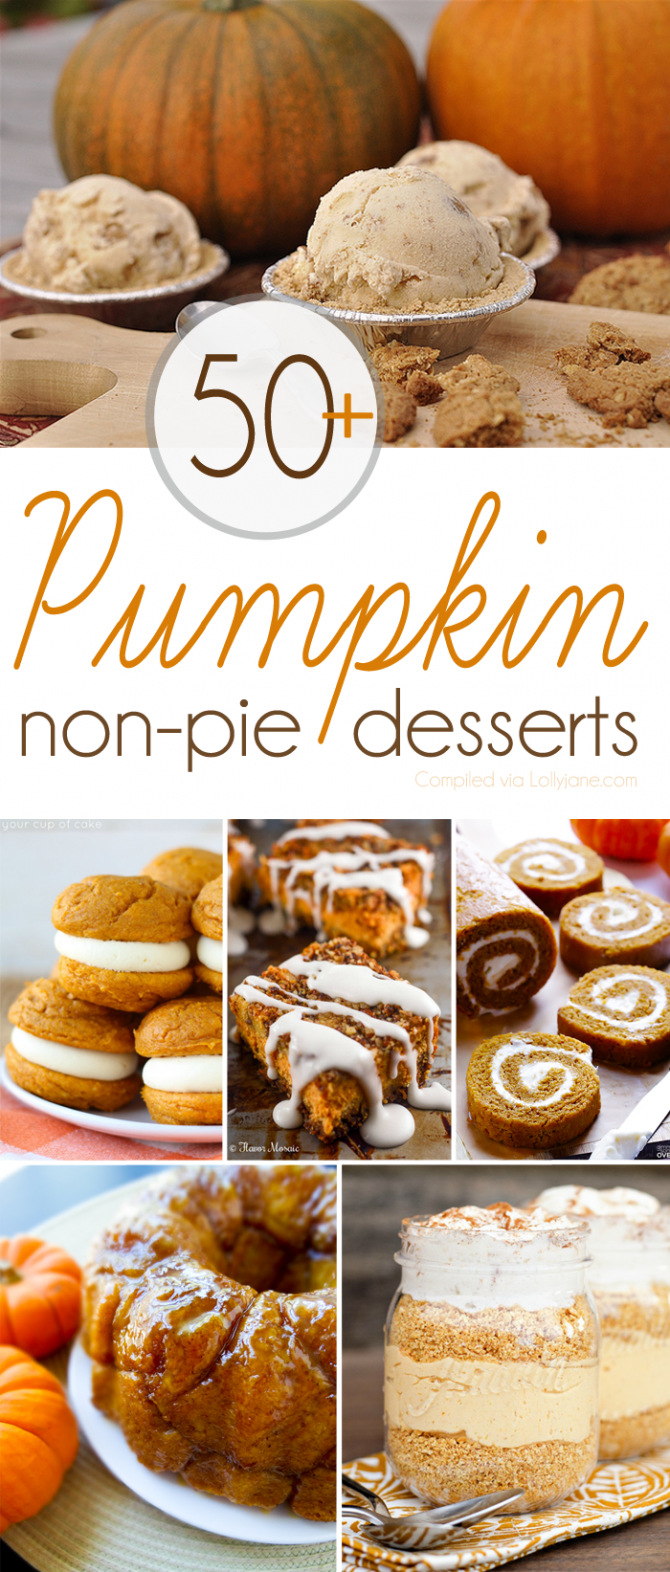 The BEST of all those pumpkin desserts recipes when you want something besides pie! Over 50+ YUMMY recipes! |via lollyjane.com